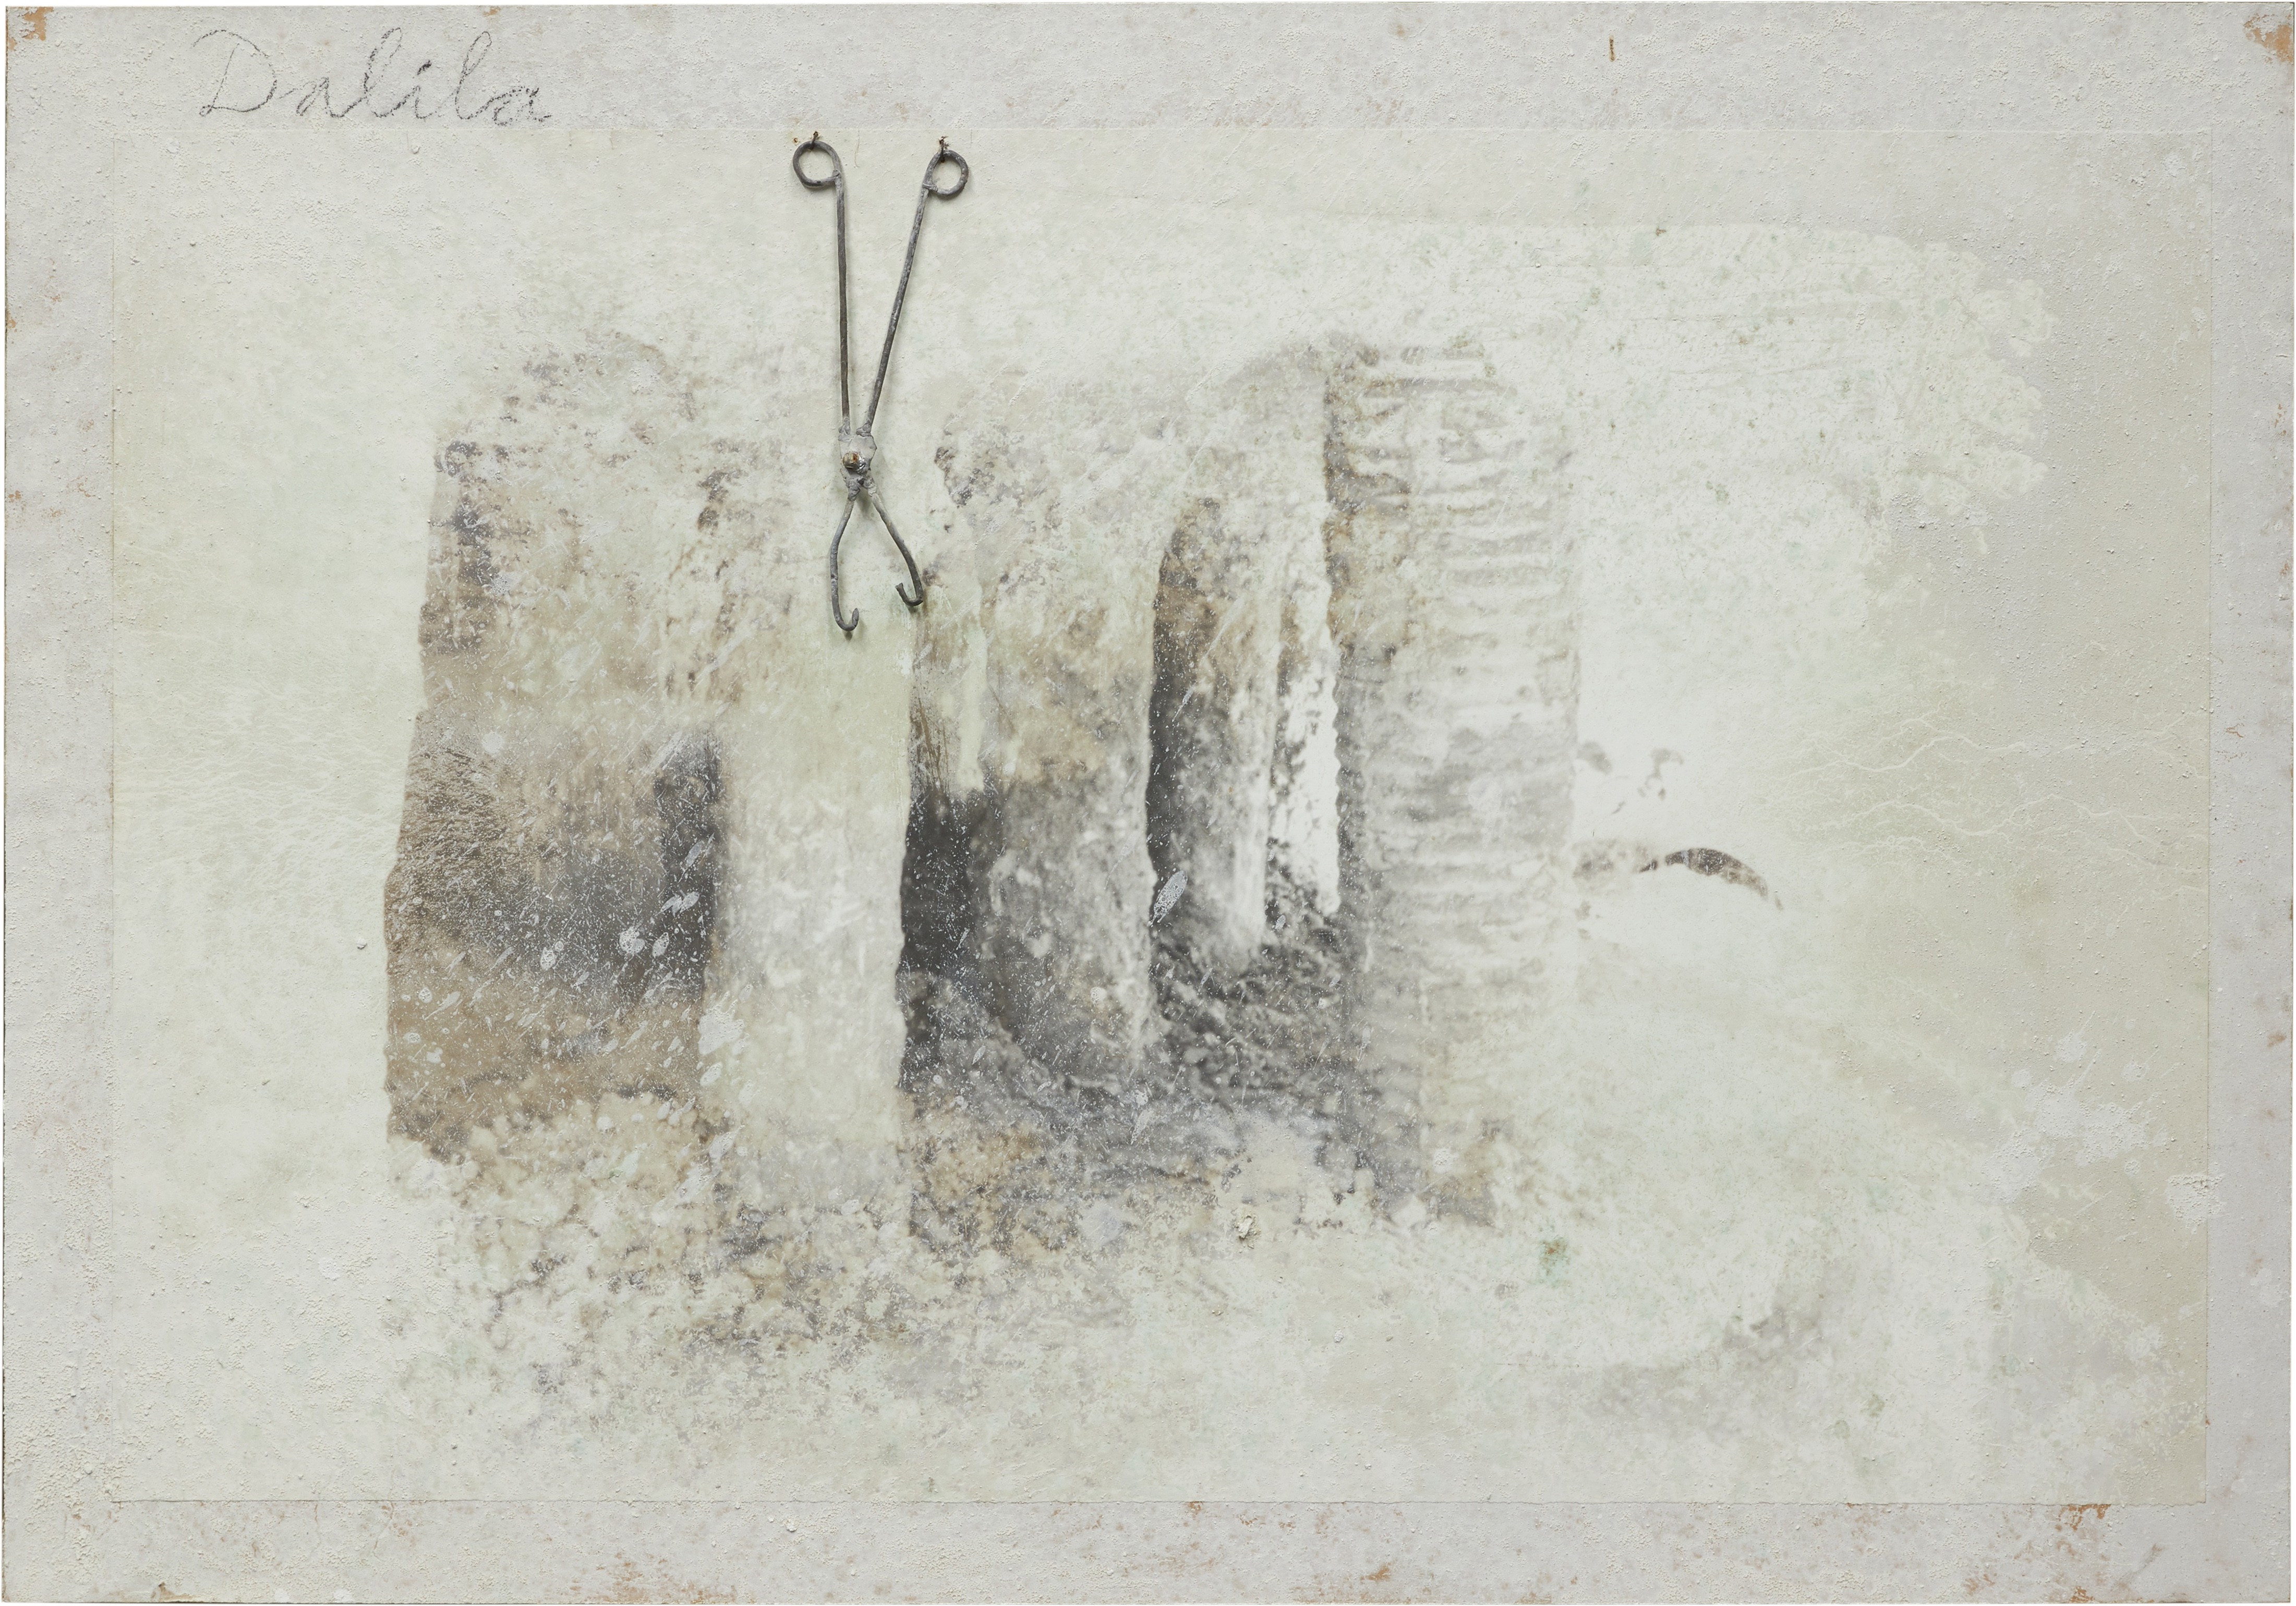 Dalila by Anselm Kiefer, Executed in 2012